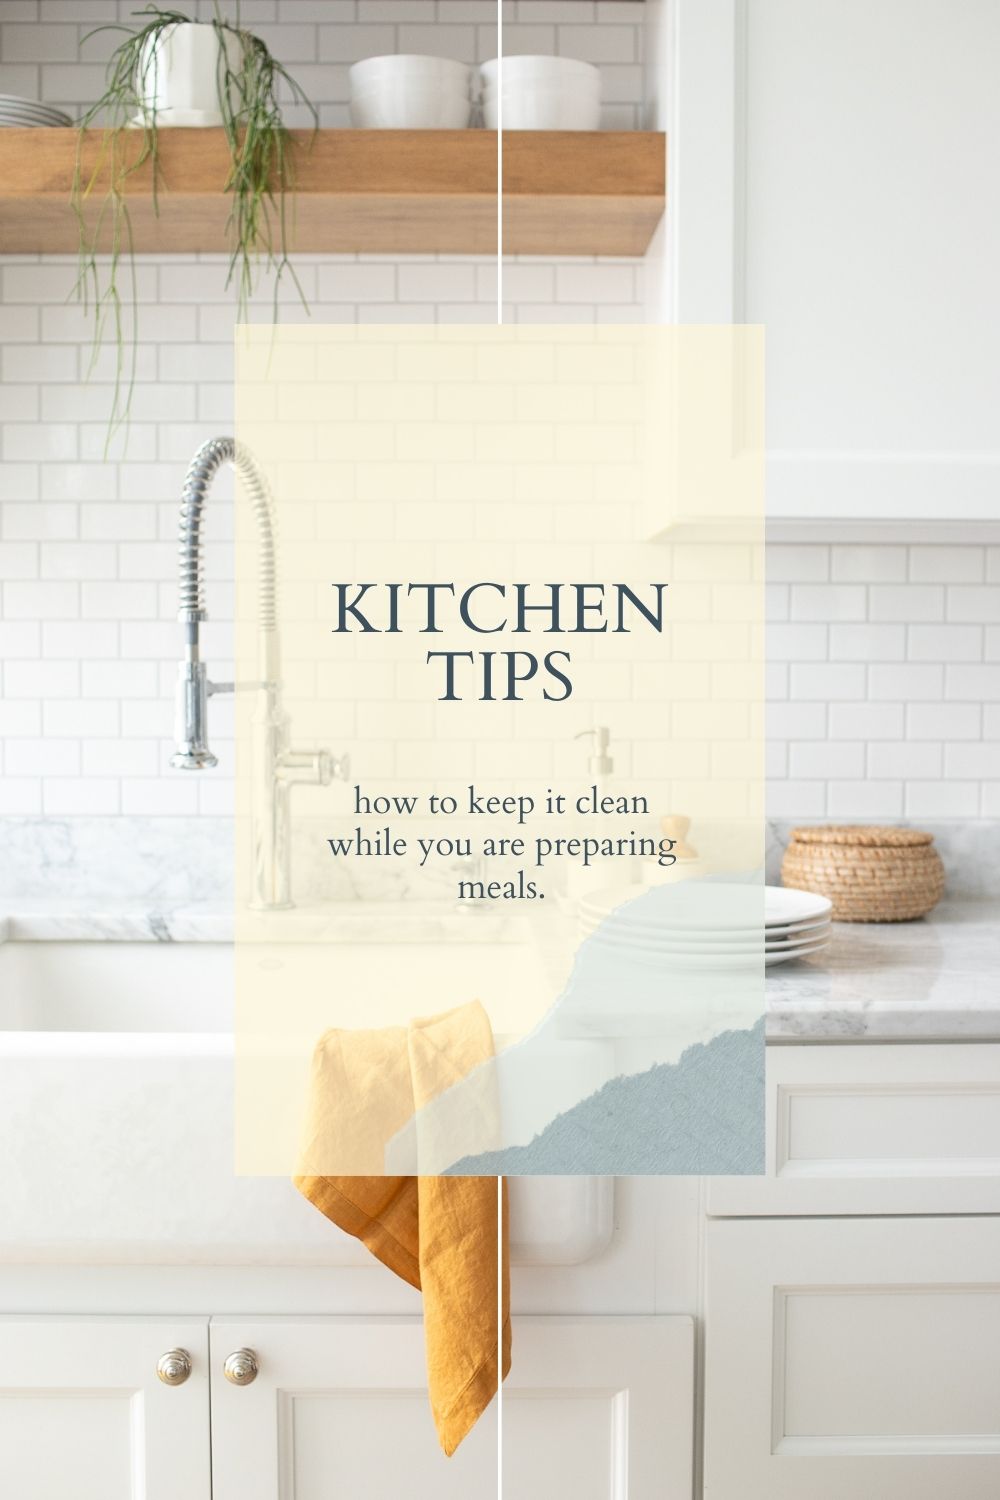 Tips for Keeping Your Kitchen Clean While Preparing Meals